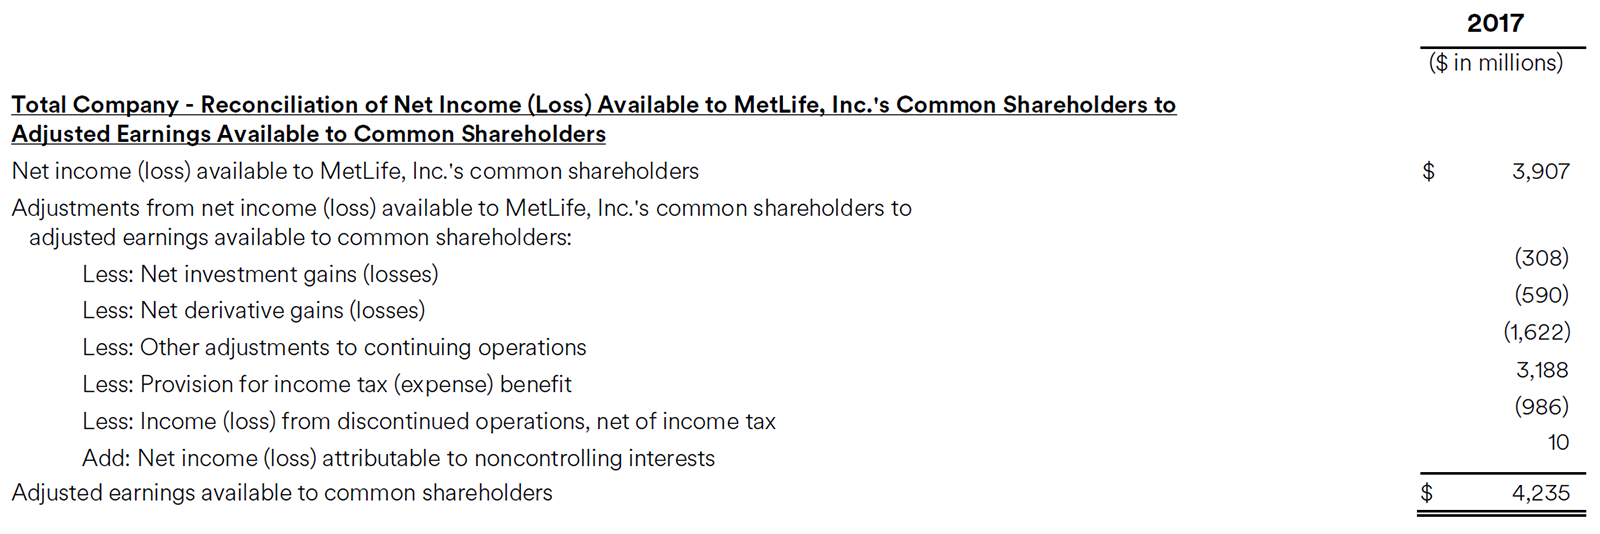 Total Company - Reconciliation of Net Income (Loss) Available to MetLife, Inc.'s Common
Shareholders to Operating Earnings Available to Common Shareholders